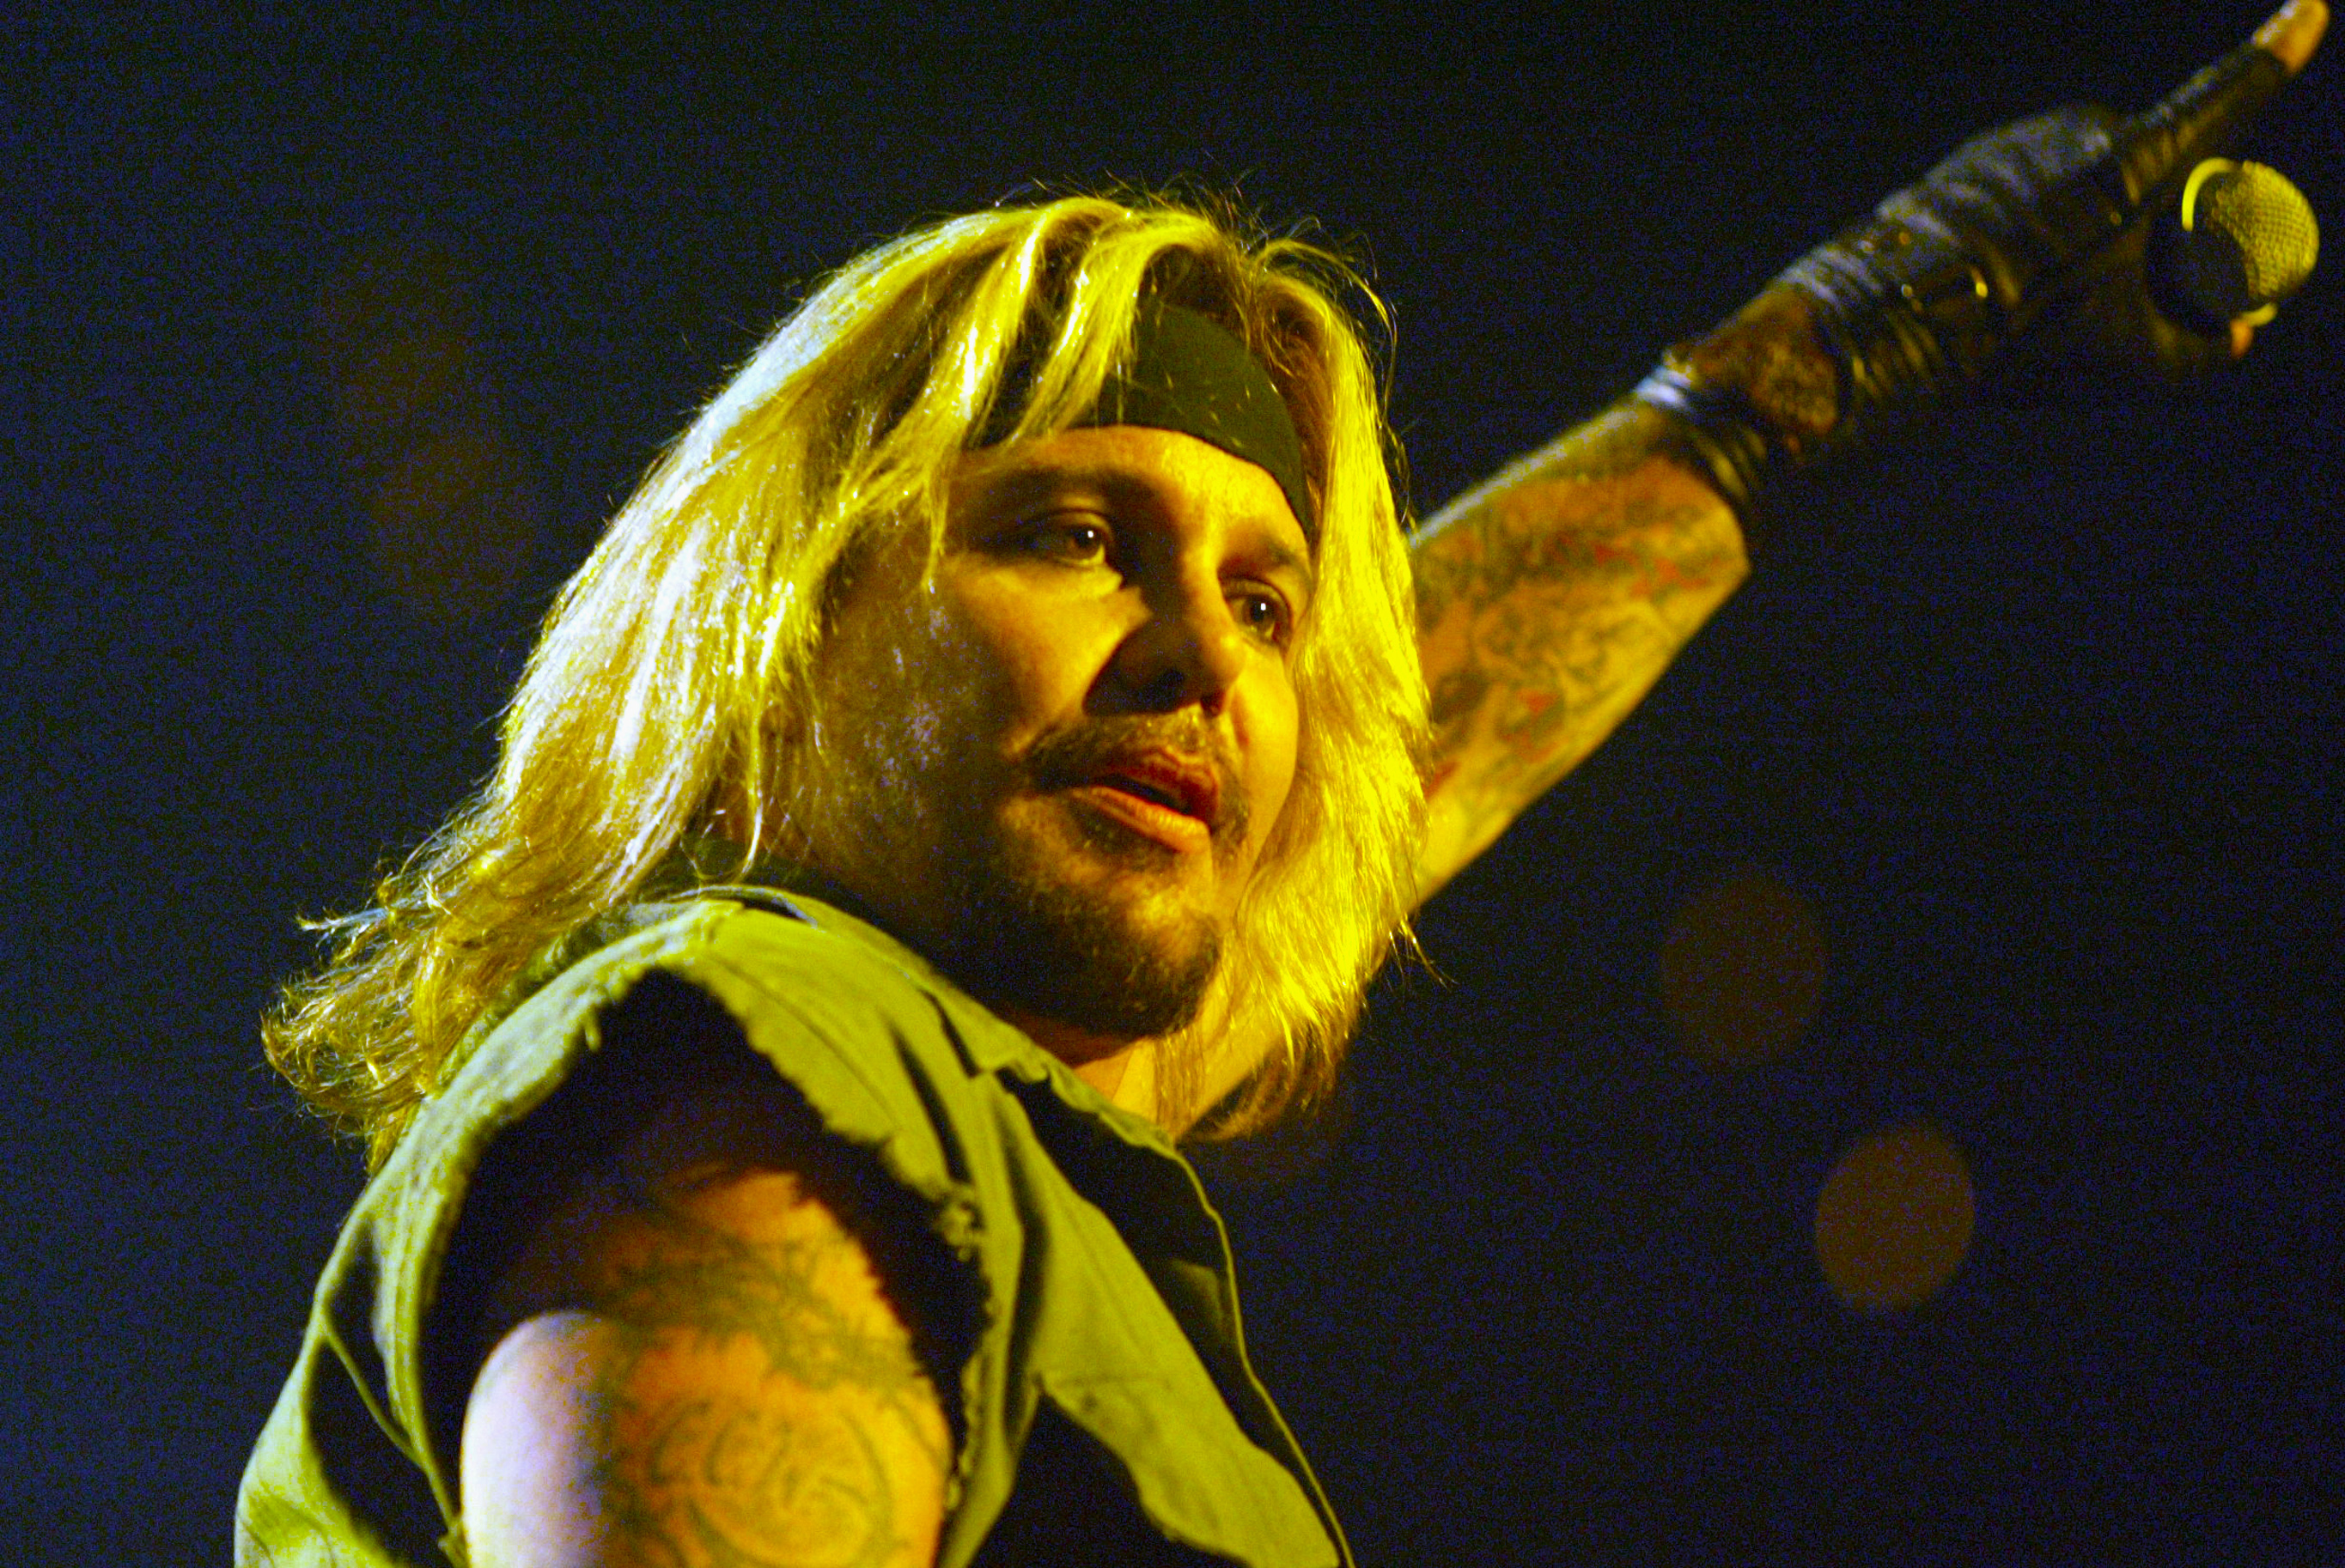 Vince Neil performing with Mötley Crüe at the MCI Center in Washington DC on March 6, 2005 | Source: Getty Images